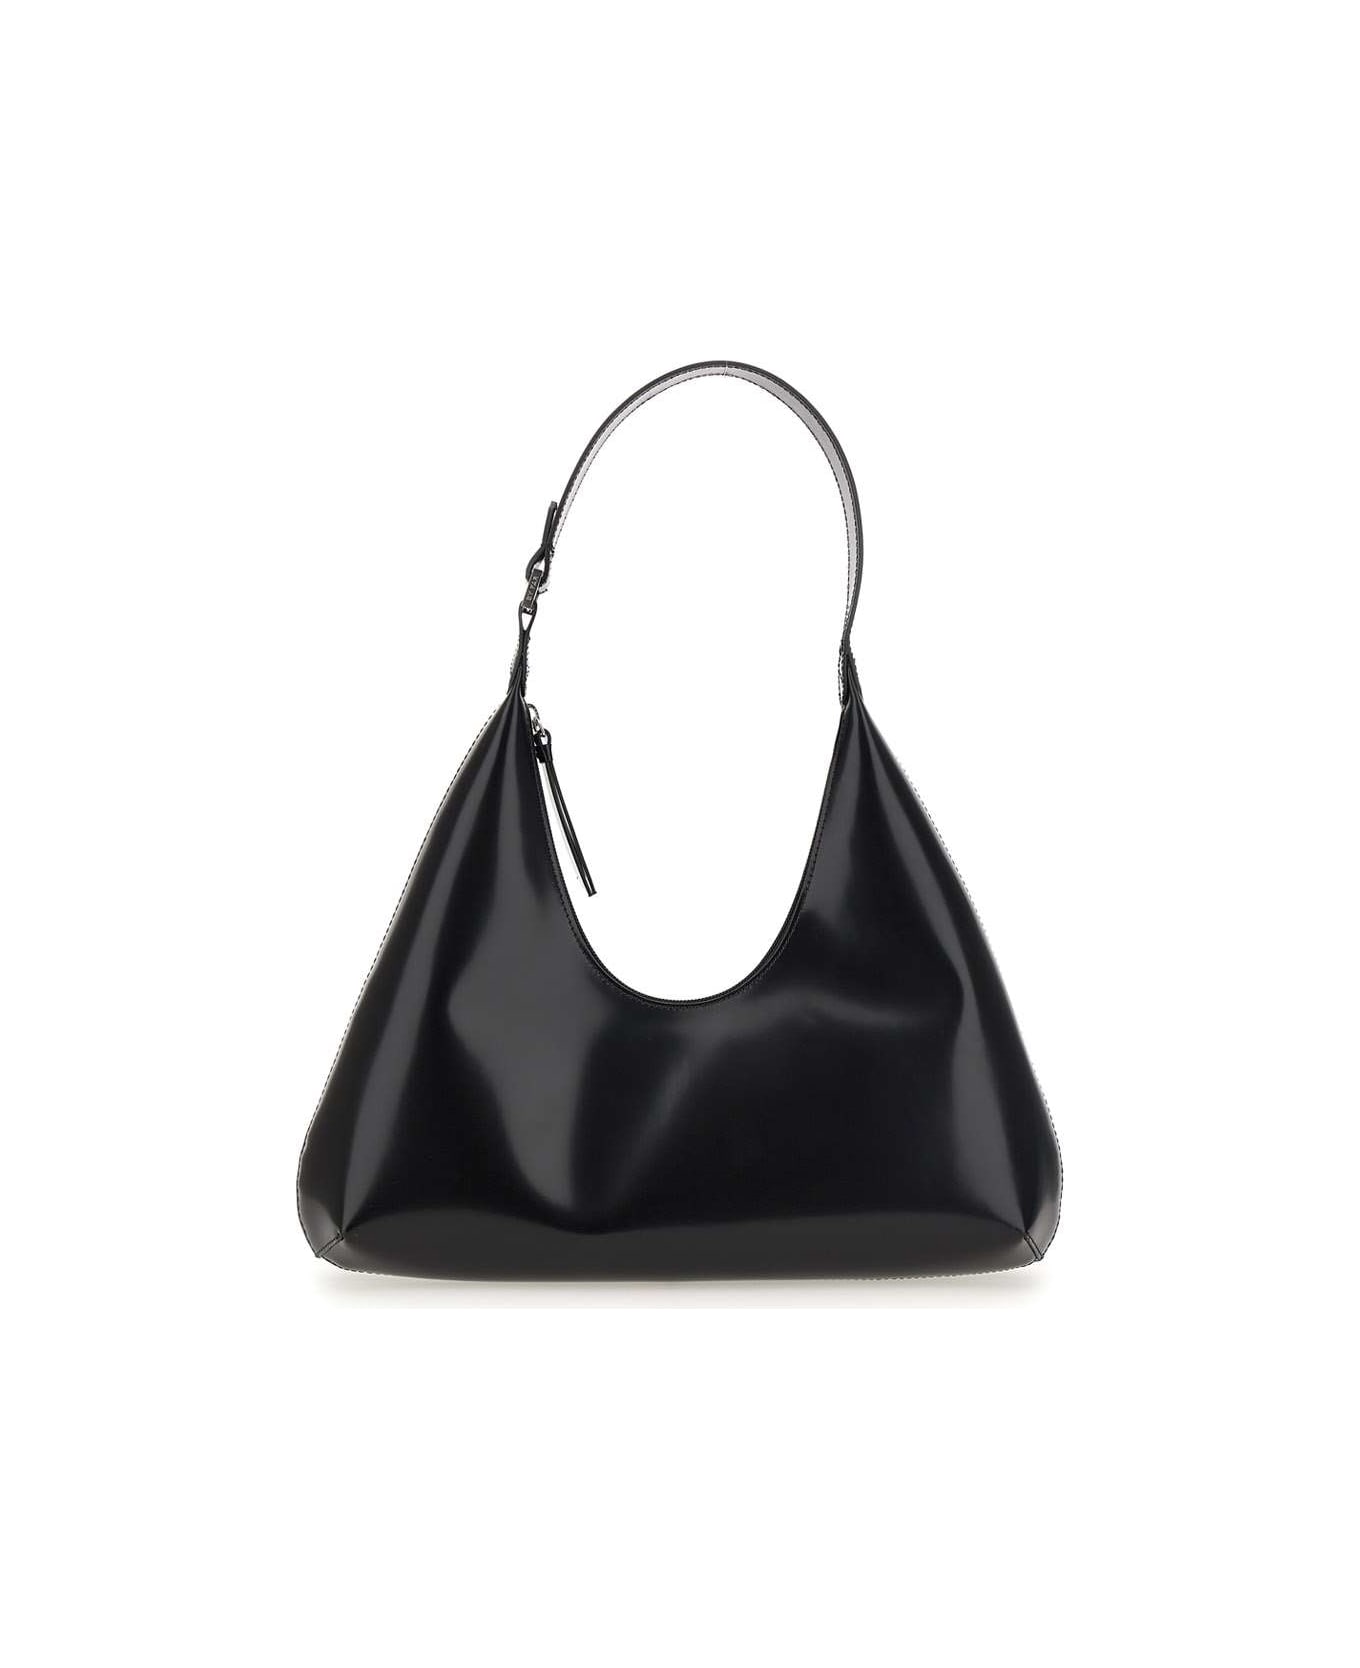 BY FAR 'amber' Leather Bag - Black